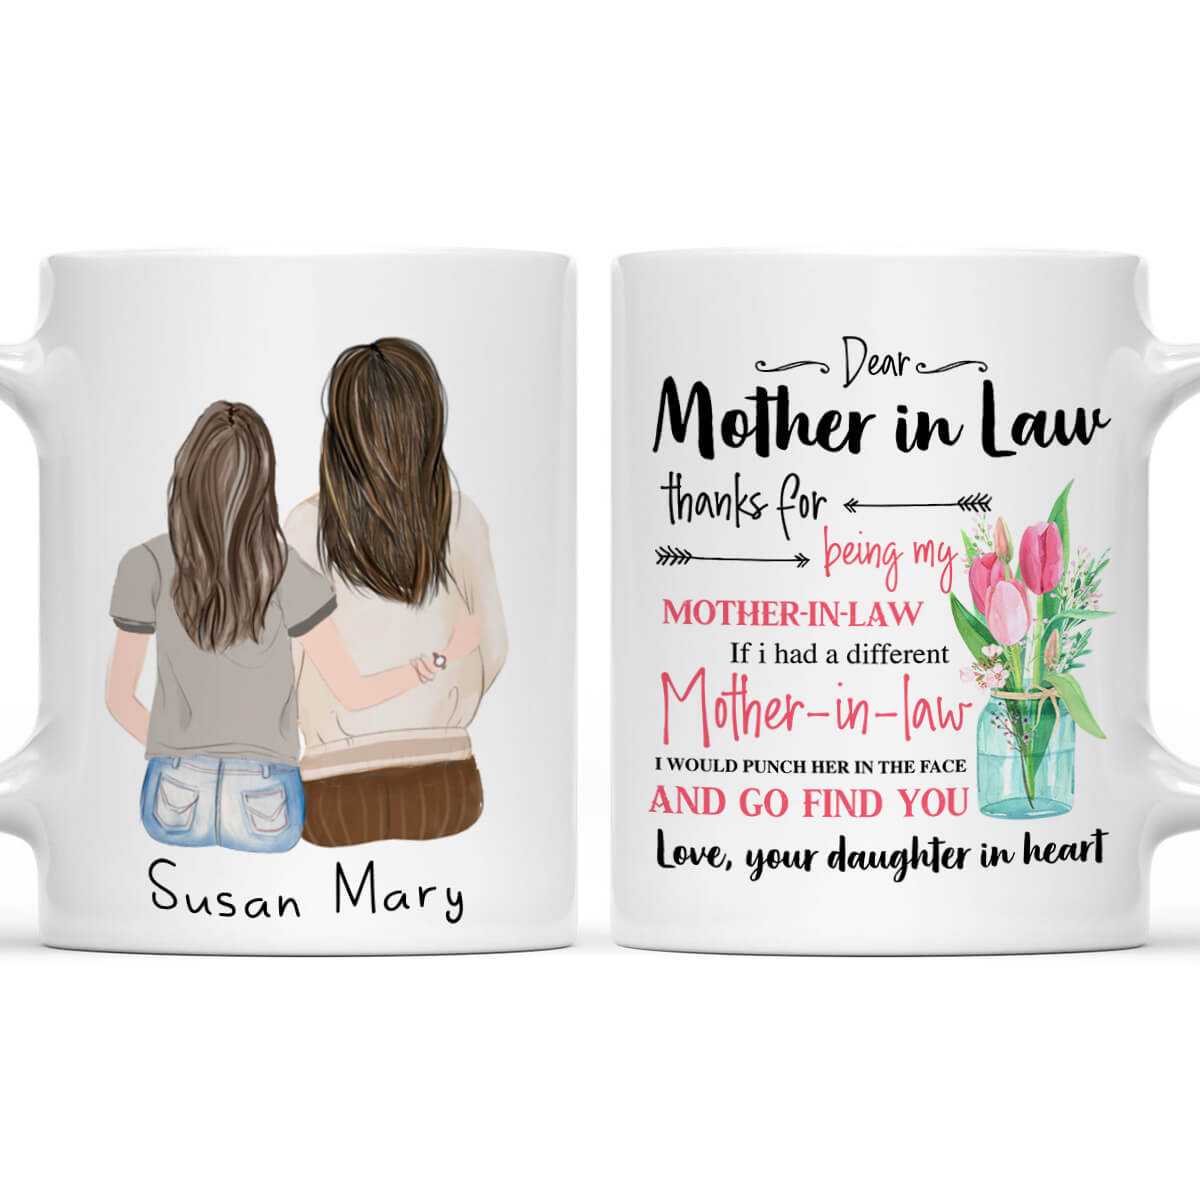 Personalized Funny Mug for Mom from Daughter, Son, Mother's Day